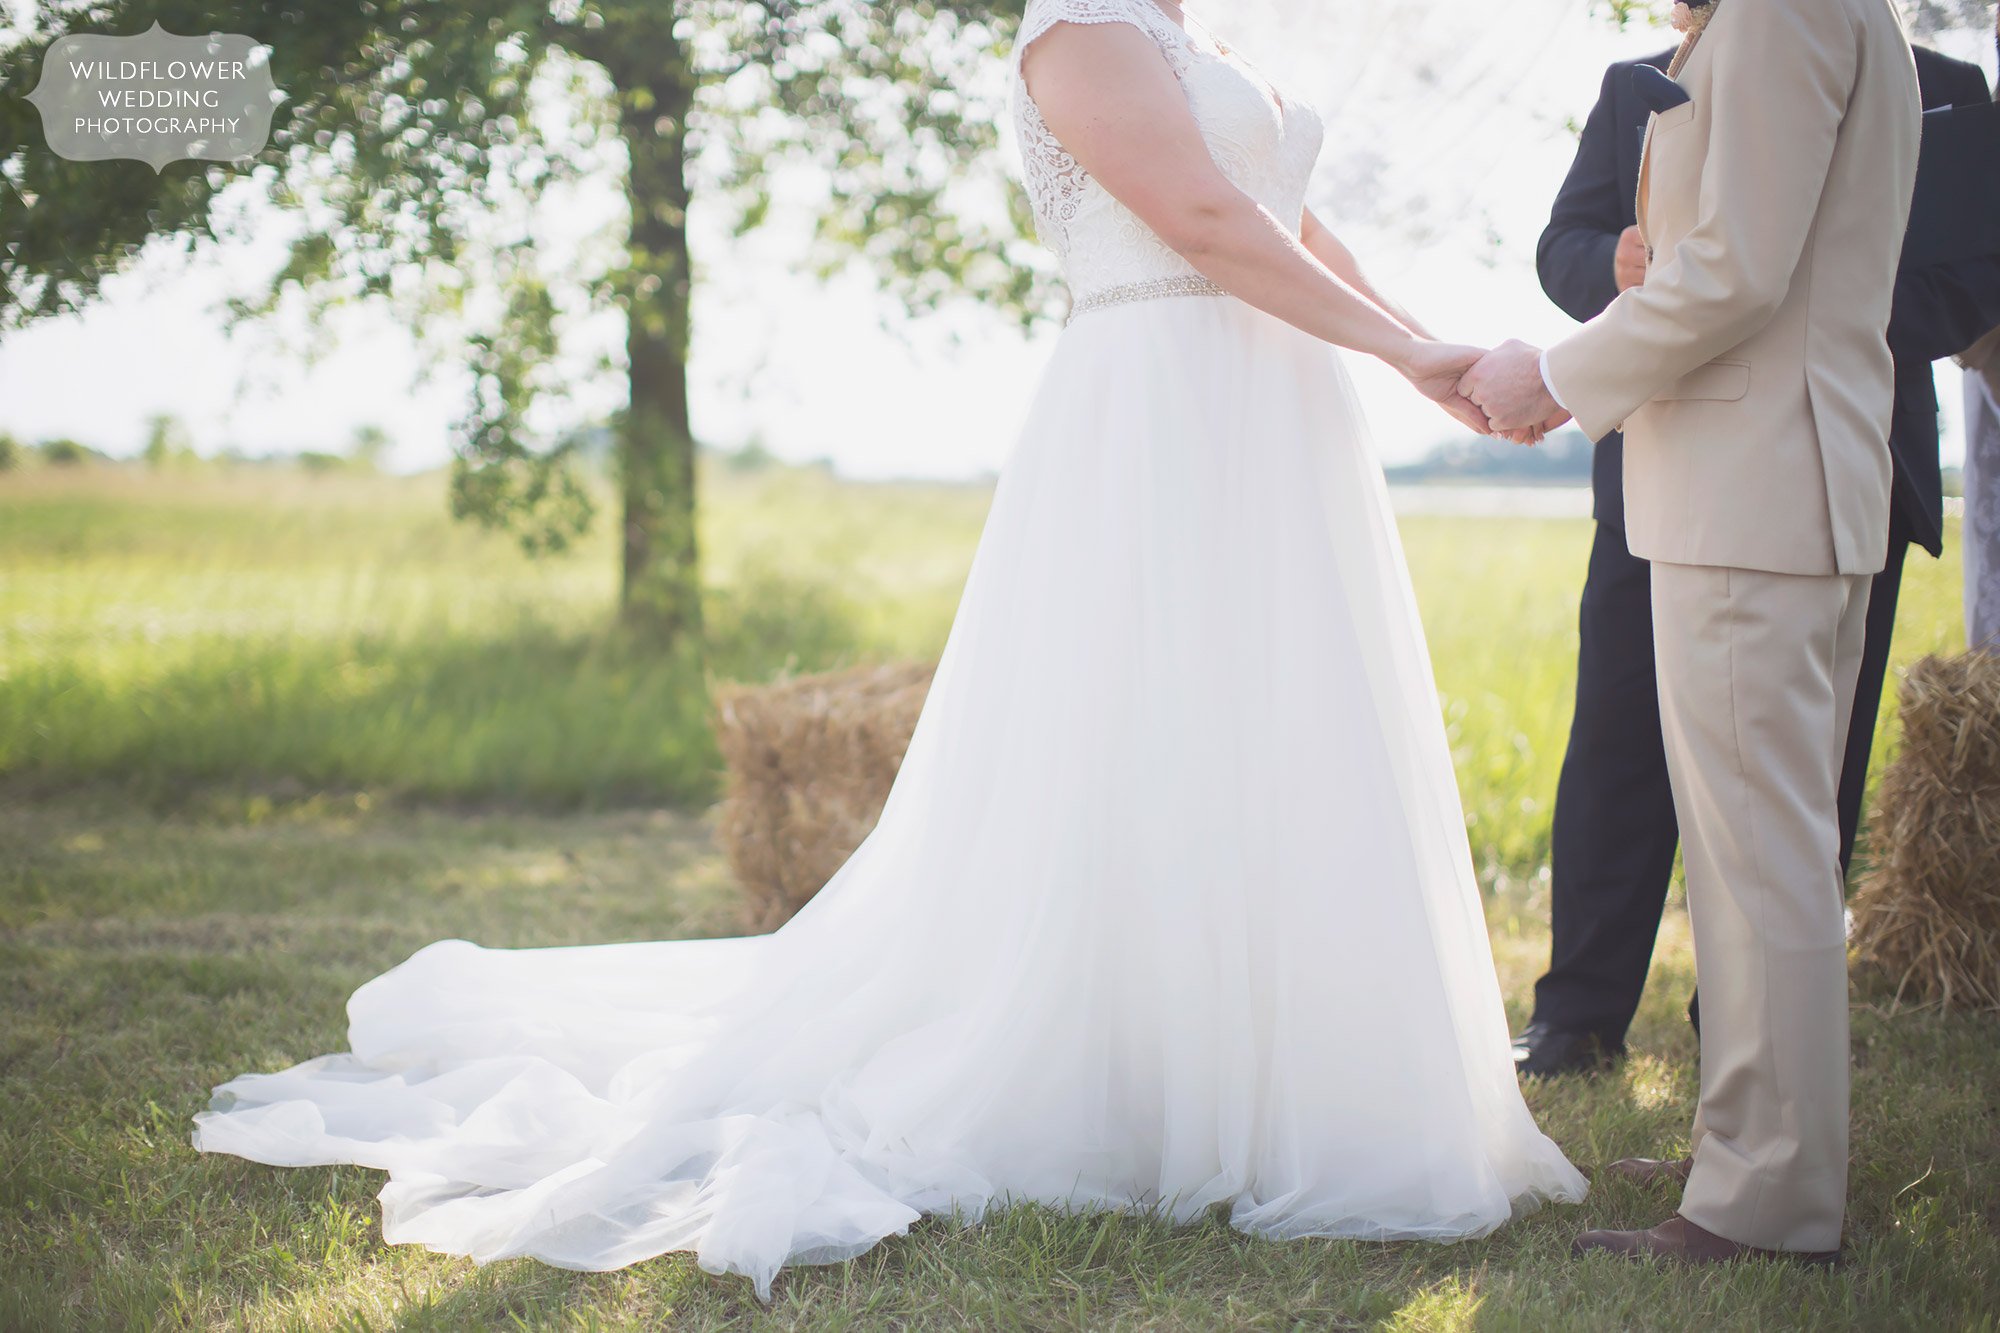 Ethereal wedding photography of the bride and groom holding hands with blurry background during outdoor ceremony at Bradford Farm.